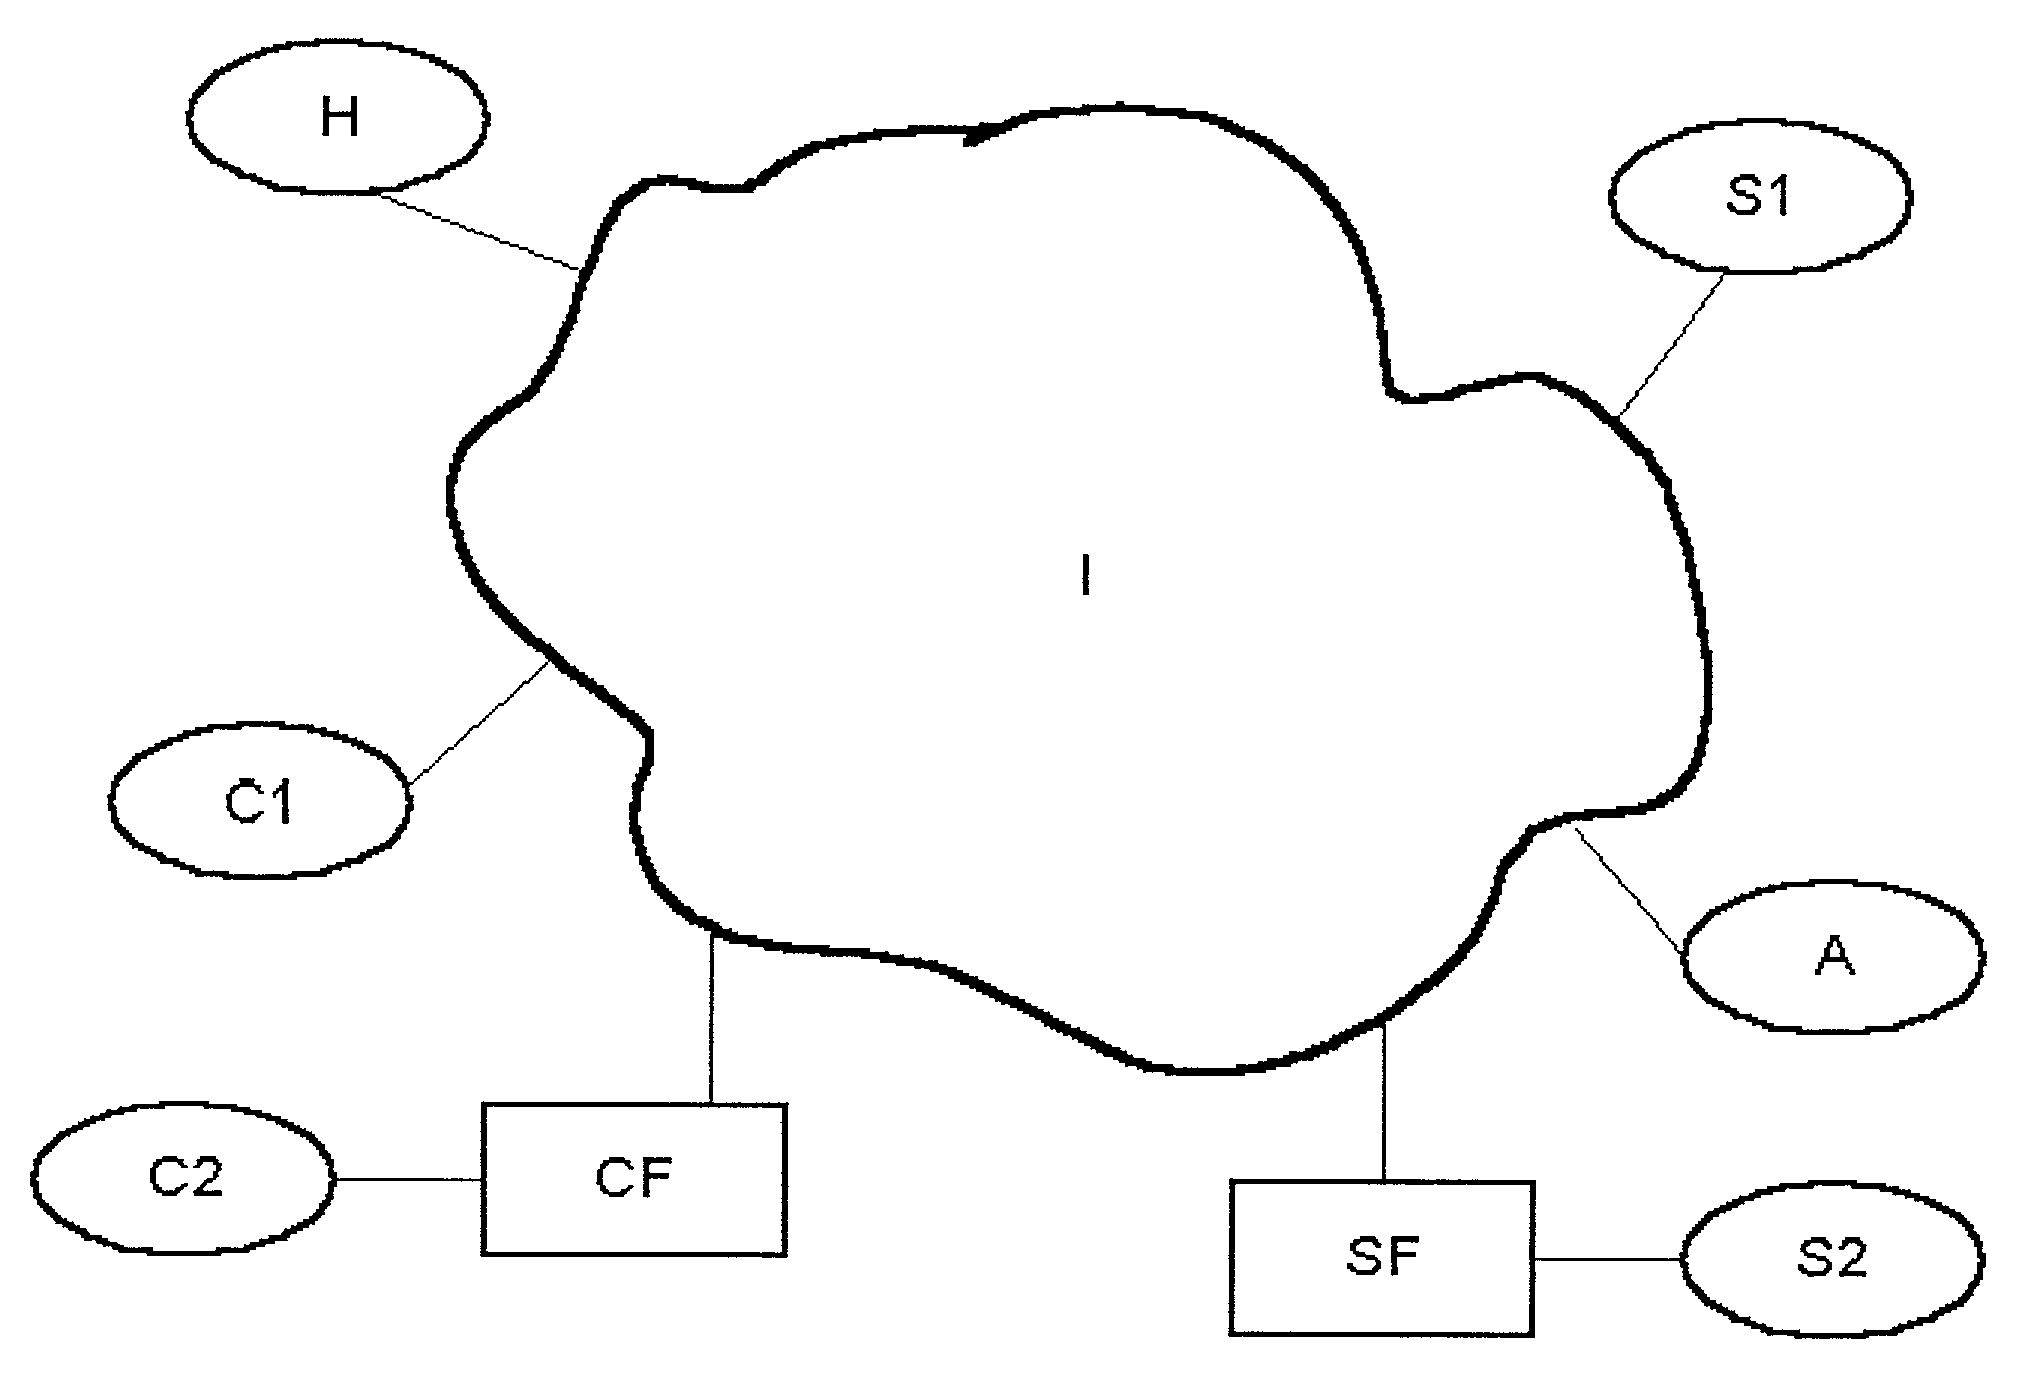 Concealing a network connected device